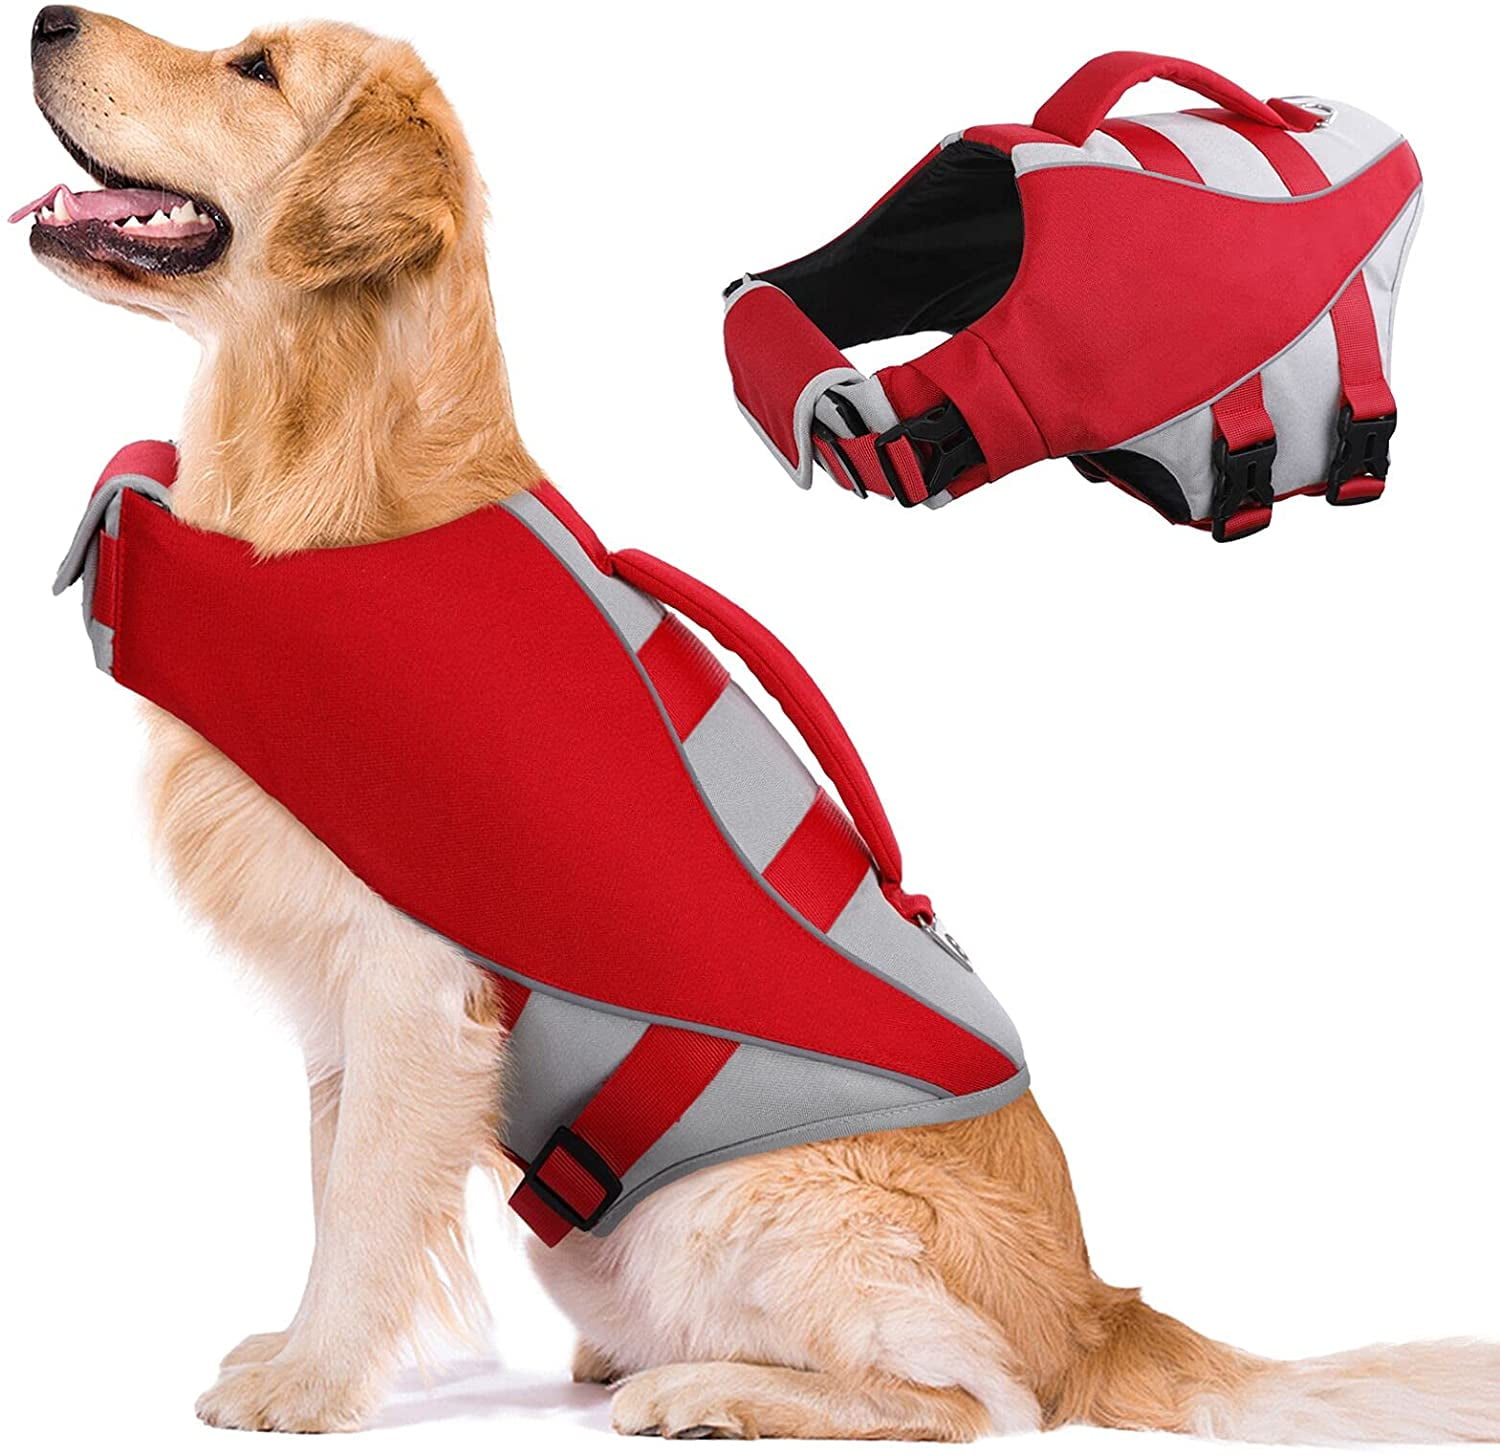 Ripstop Dog Life Jacket Reflective Stripes And Rescue Handle High Flotation For Small Medium And Large Dogs At The Pool Beach Boating